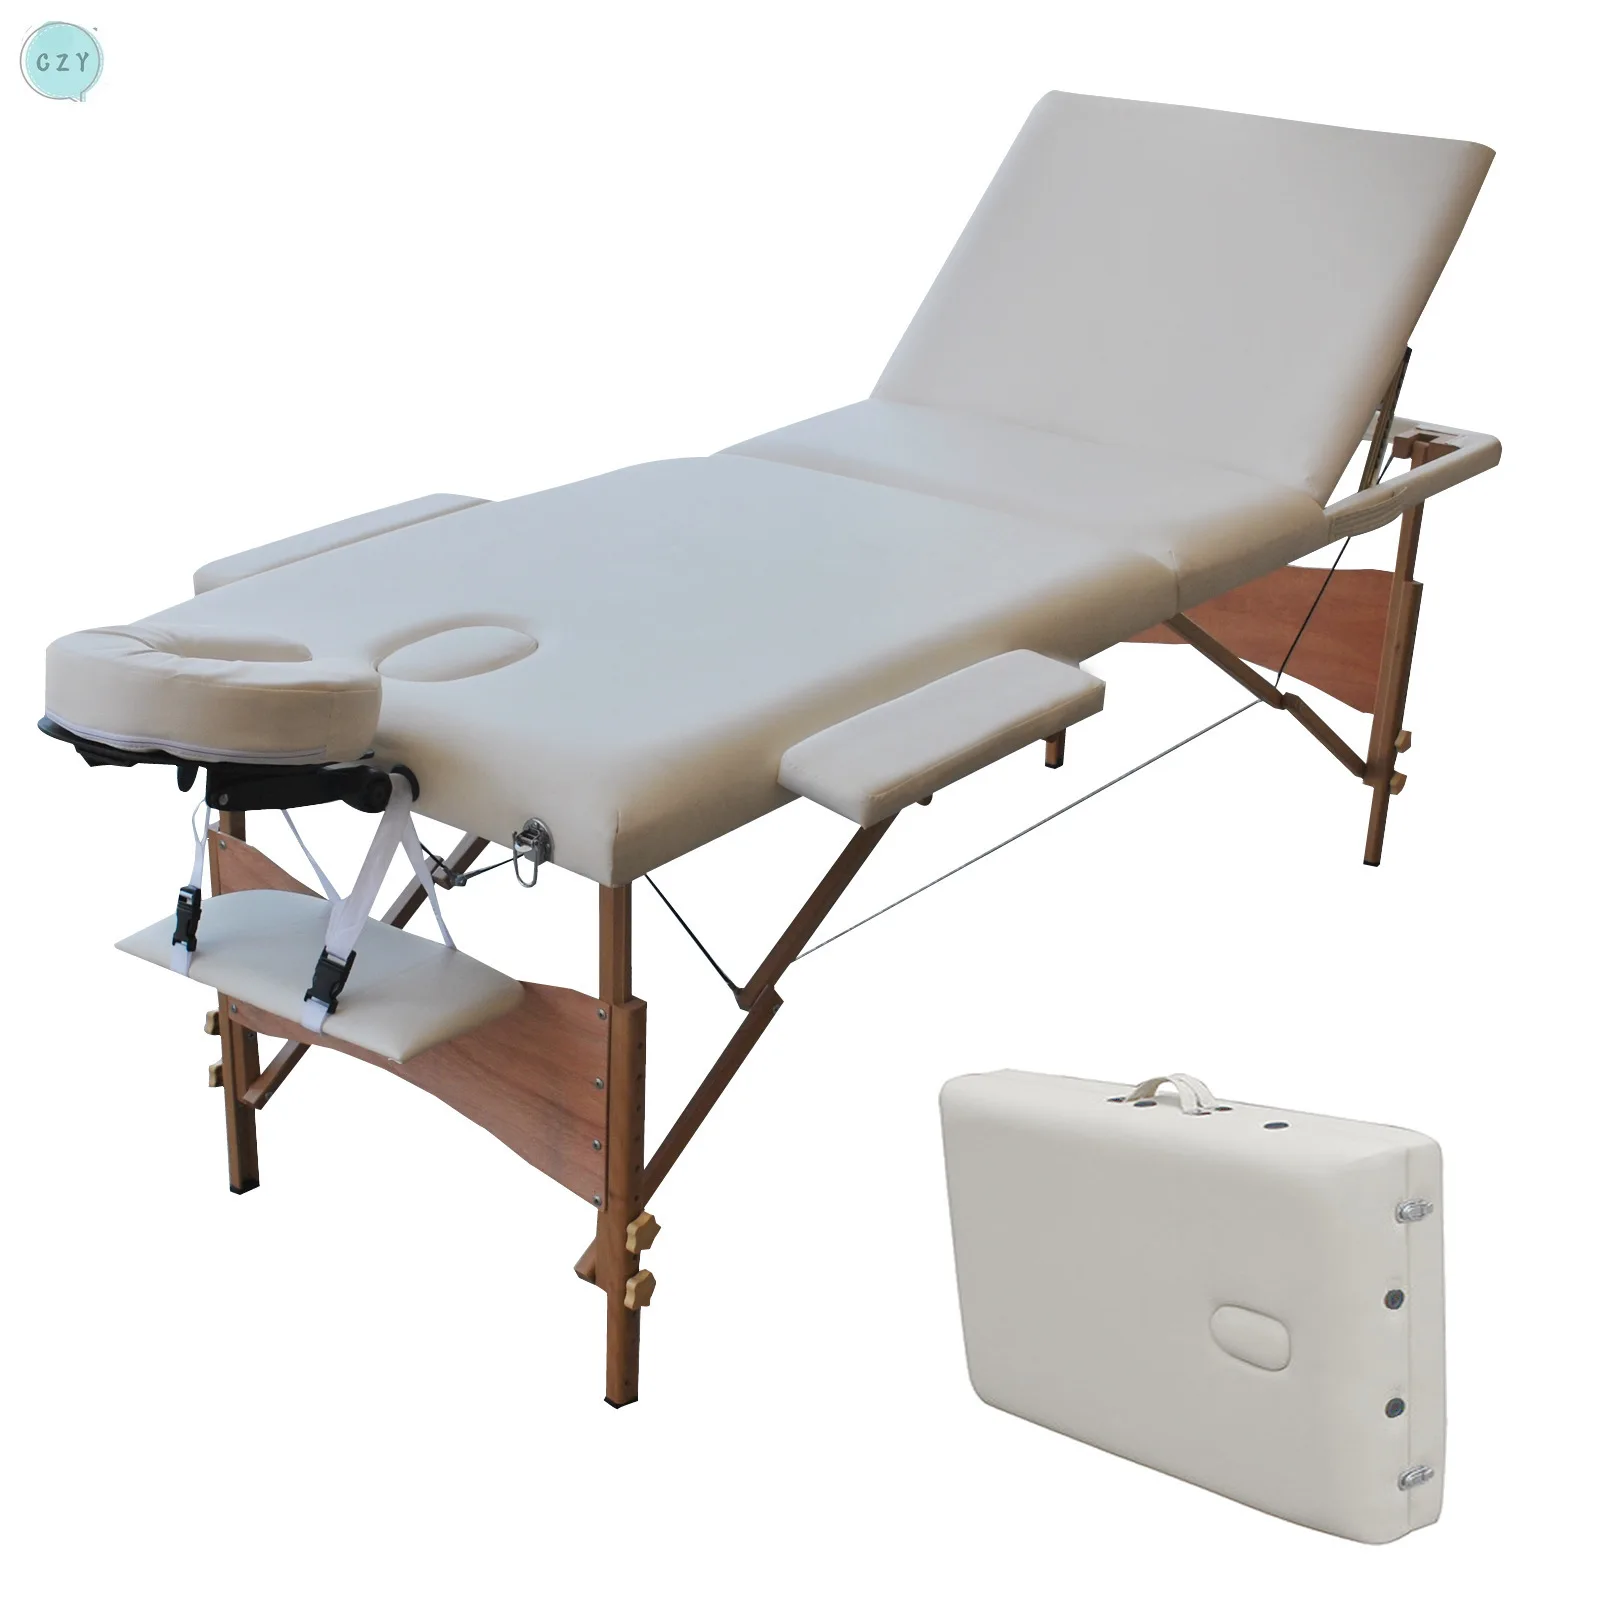 

Massage Table Folding 84 Inchs Professional Massage Bed 3 Fold Lash Bed with Head Armrest Black White Beech Wood Legs